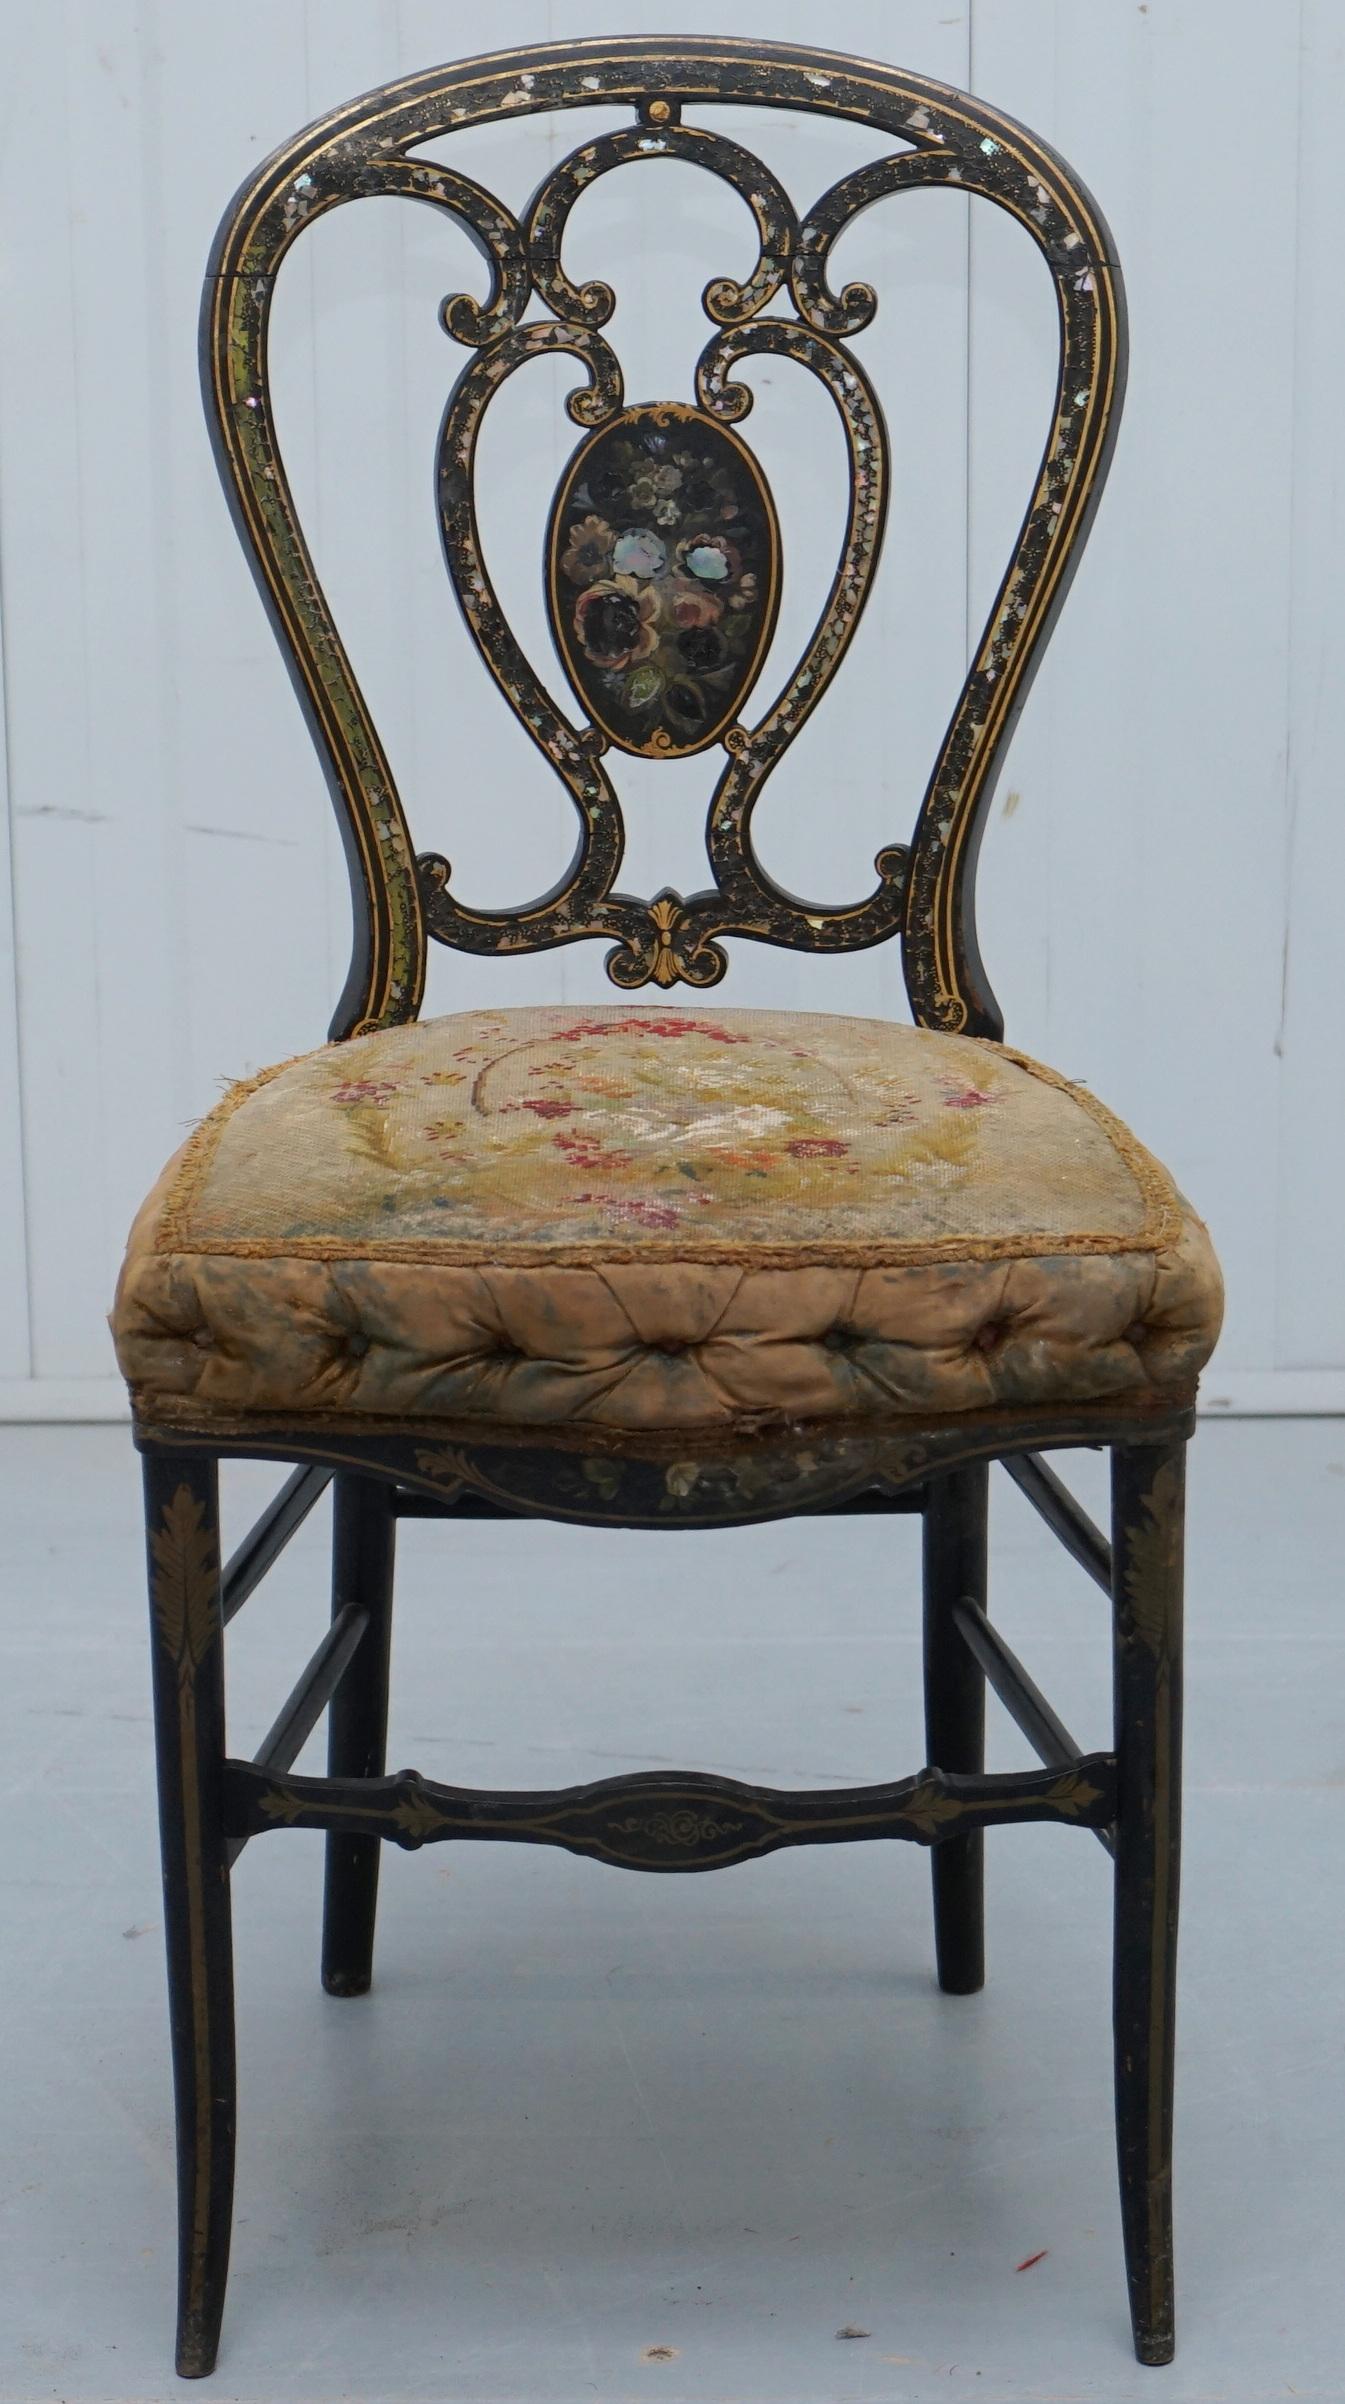 Wimbledon-Furniture

Wimbledon-Furniture is delighted to offer for sale this lovely mid 18th century George III chinoiserie black ebonised occasional chair

I absolutely love this chair, it is a very rare find, the paint work is nicely faded and